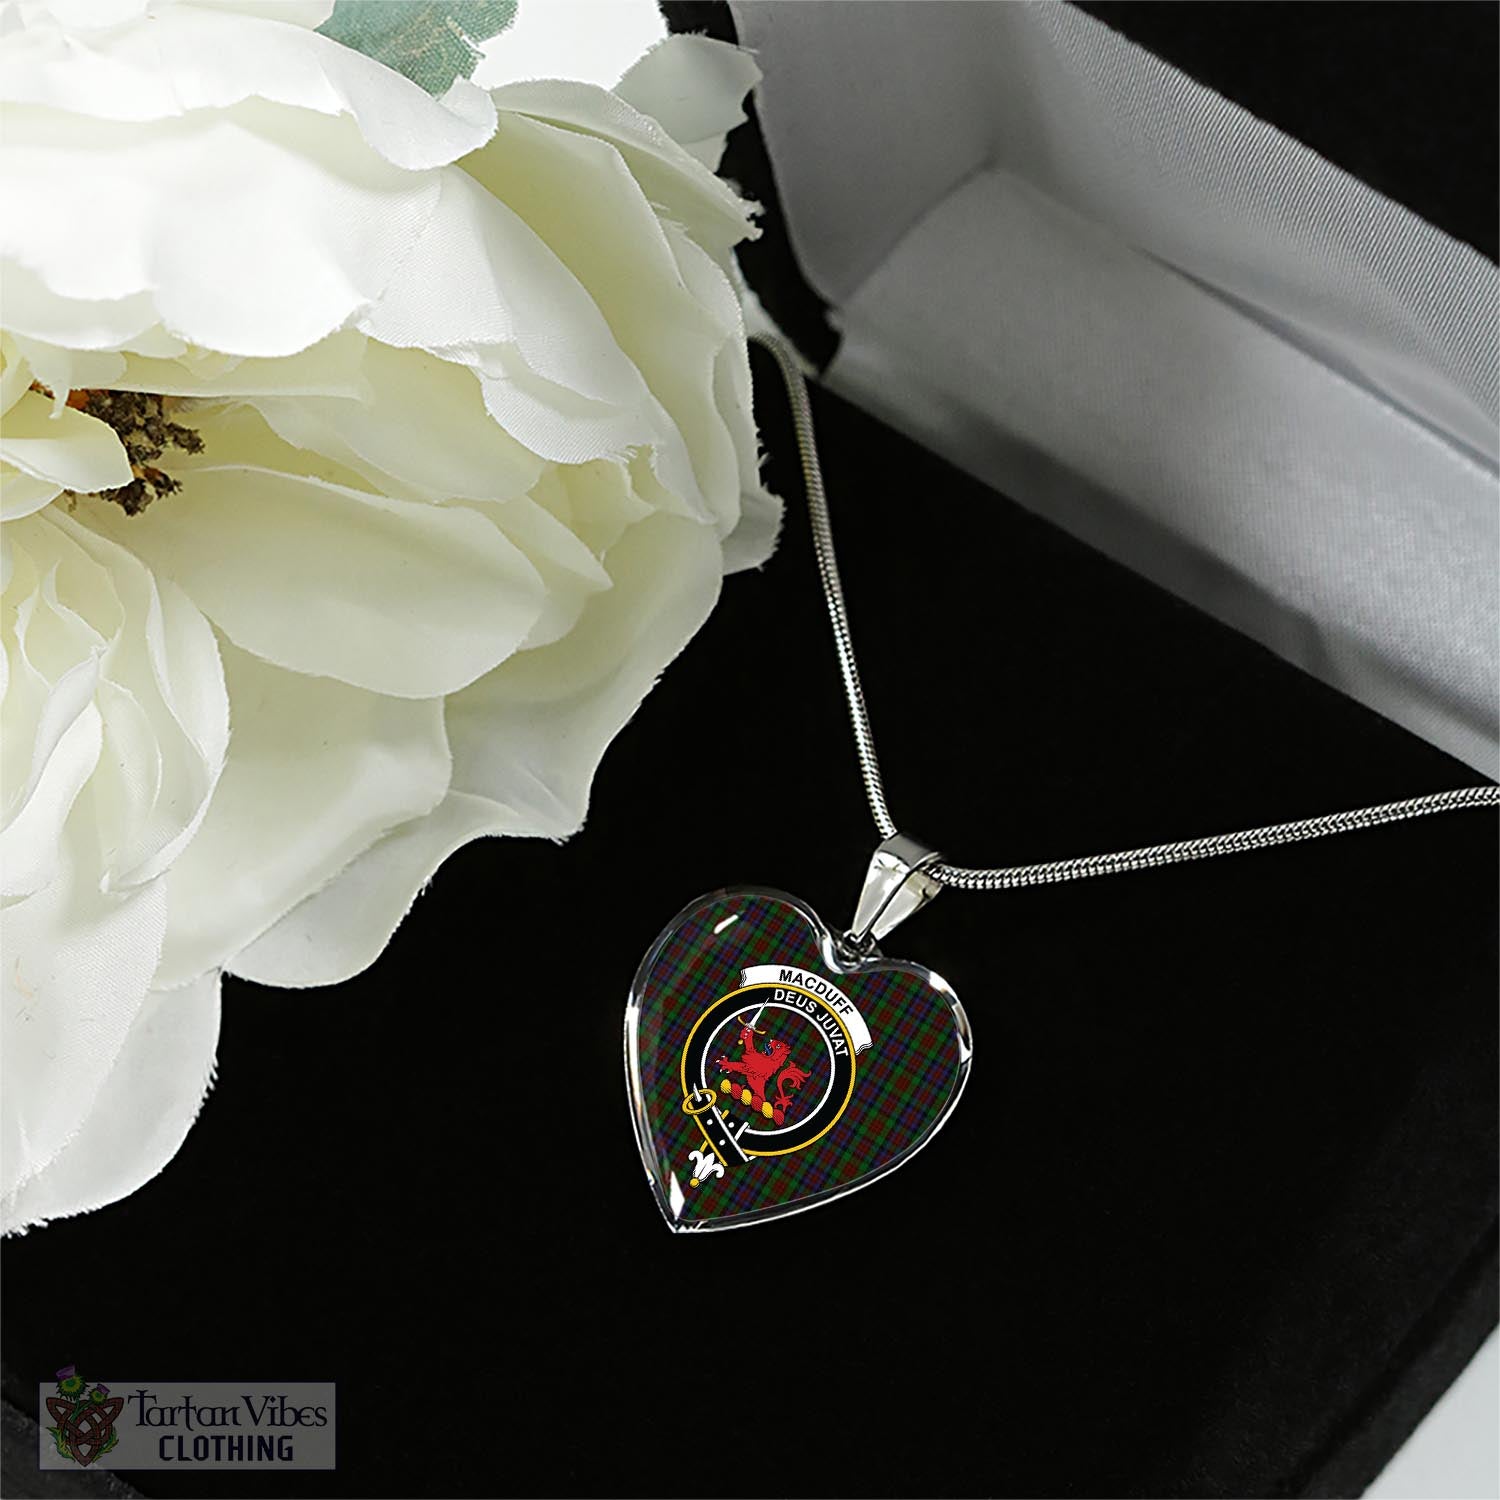 Tartan Vibes Clothing MacDuff Hunting Tartan Heart Necklace with Family Crest